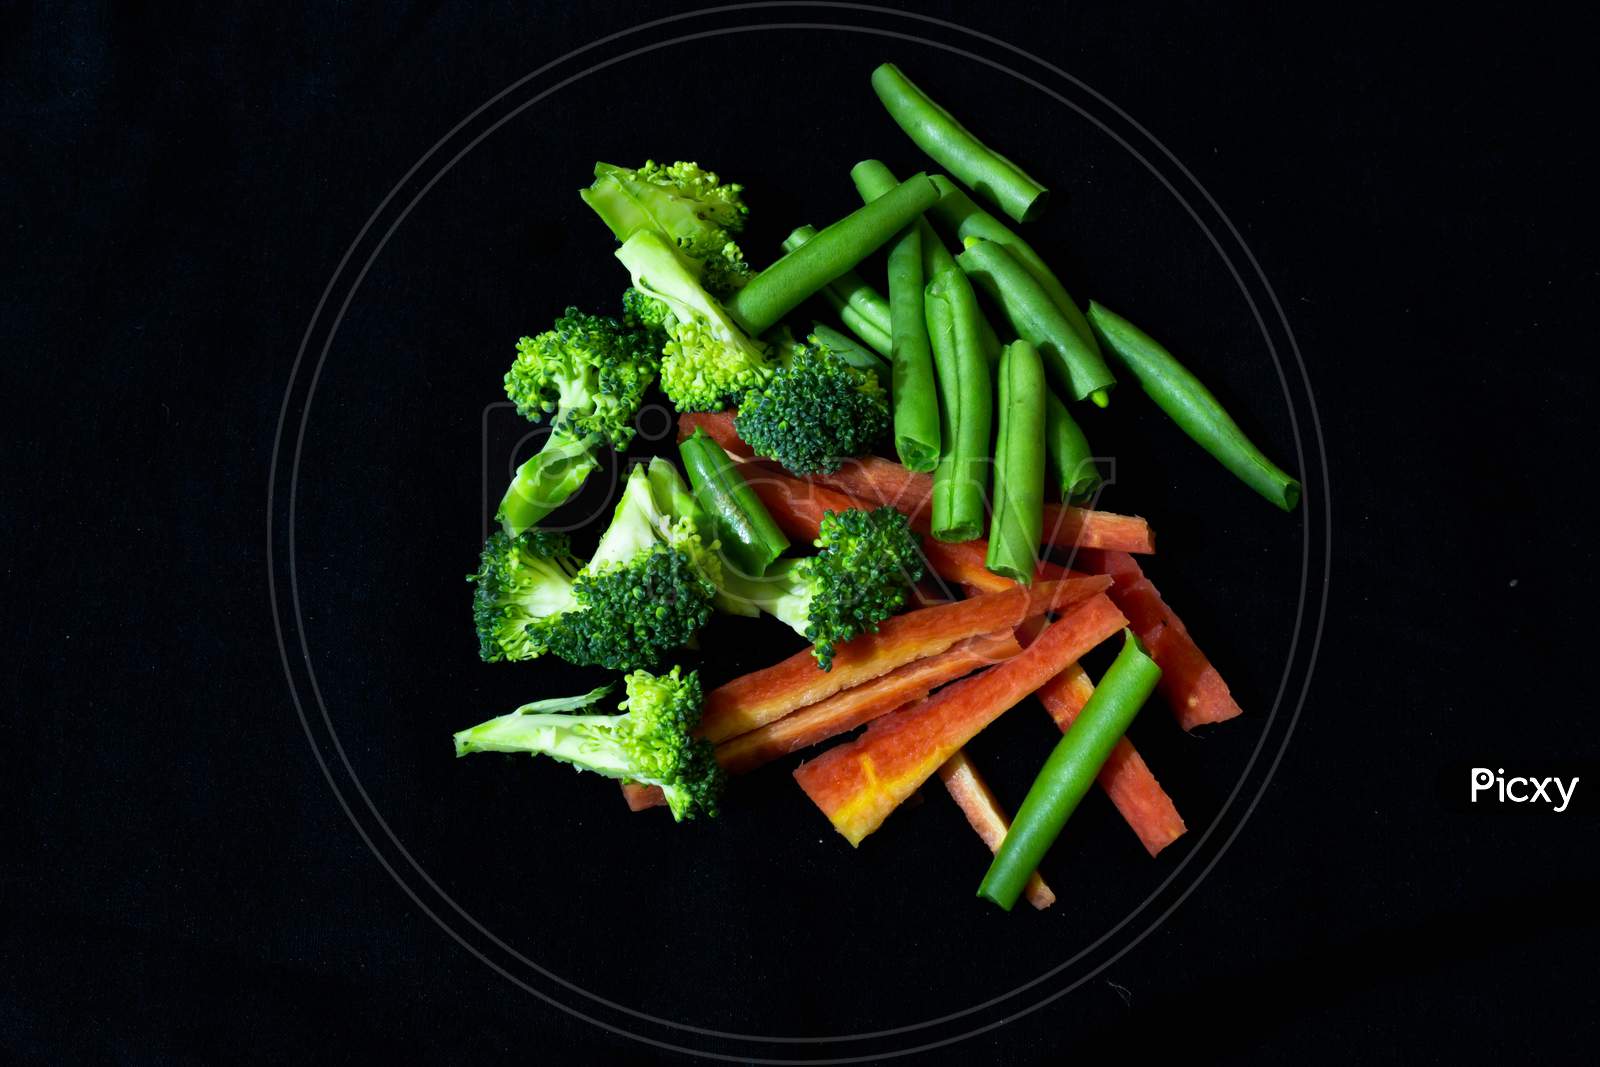 Broccoli, french beans, carrot slices